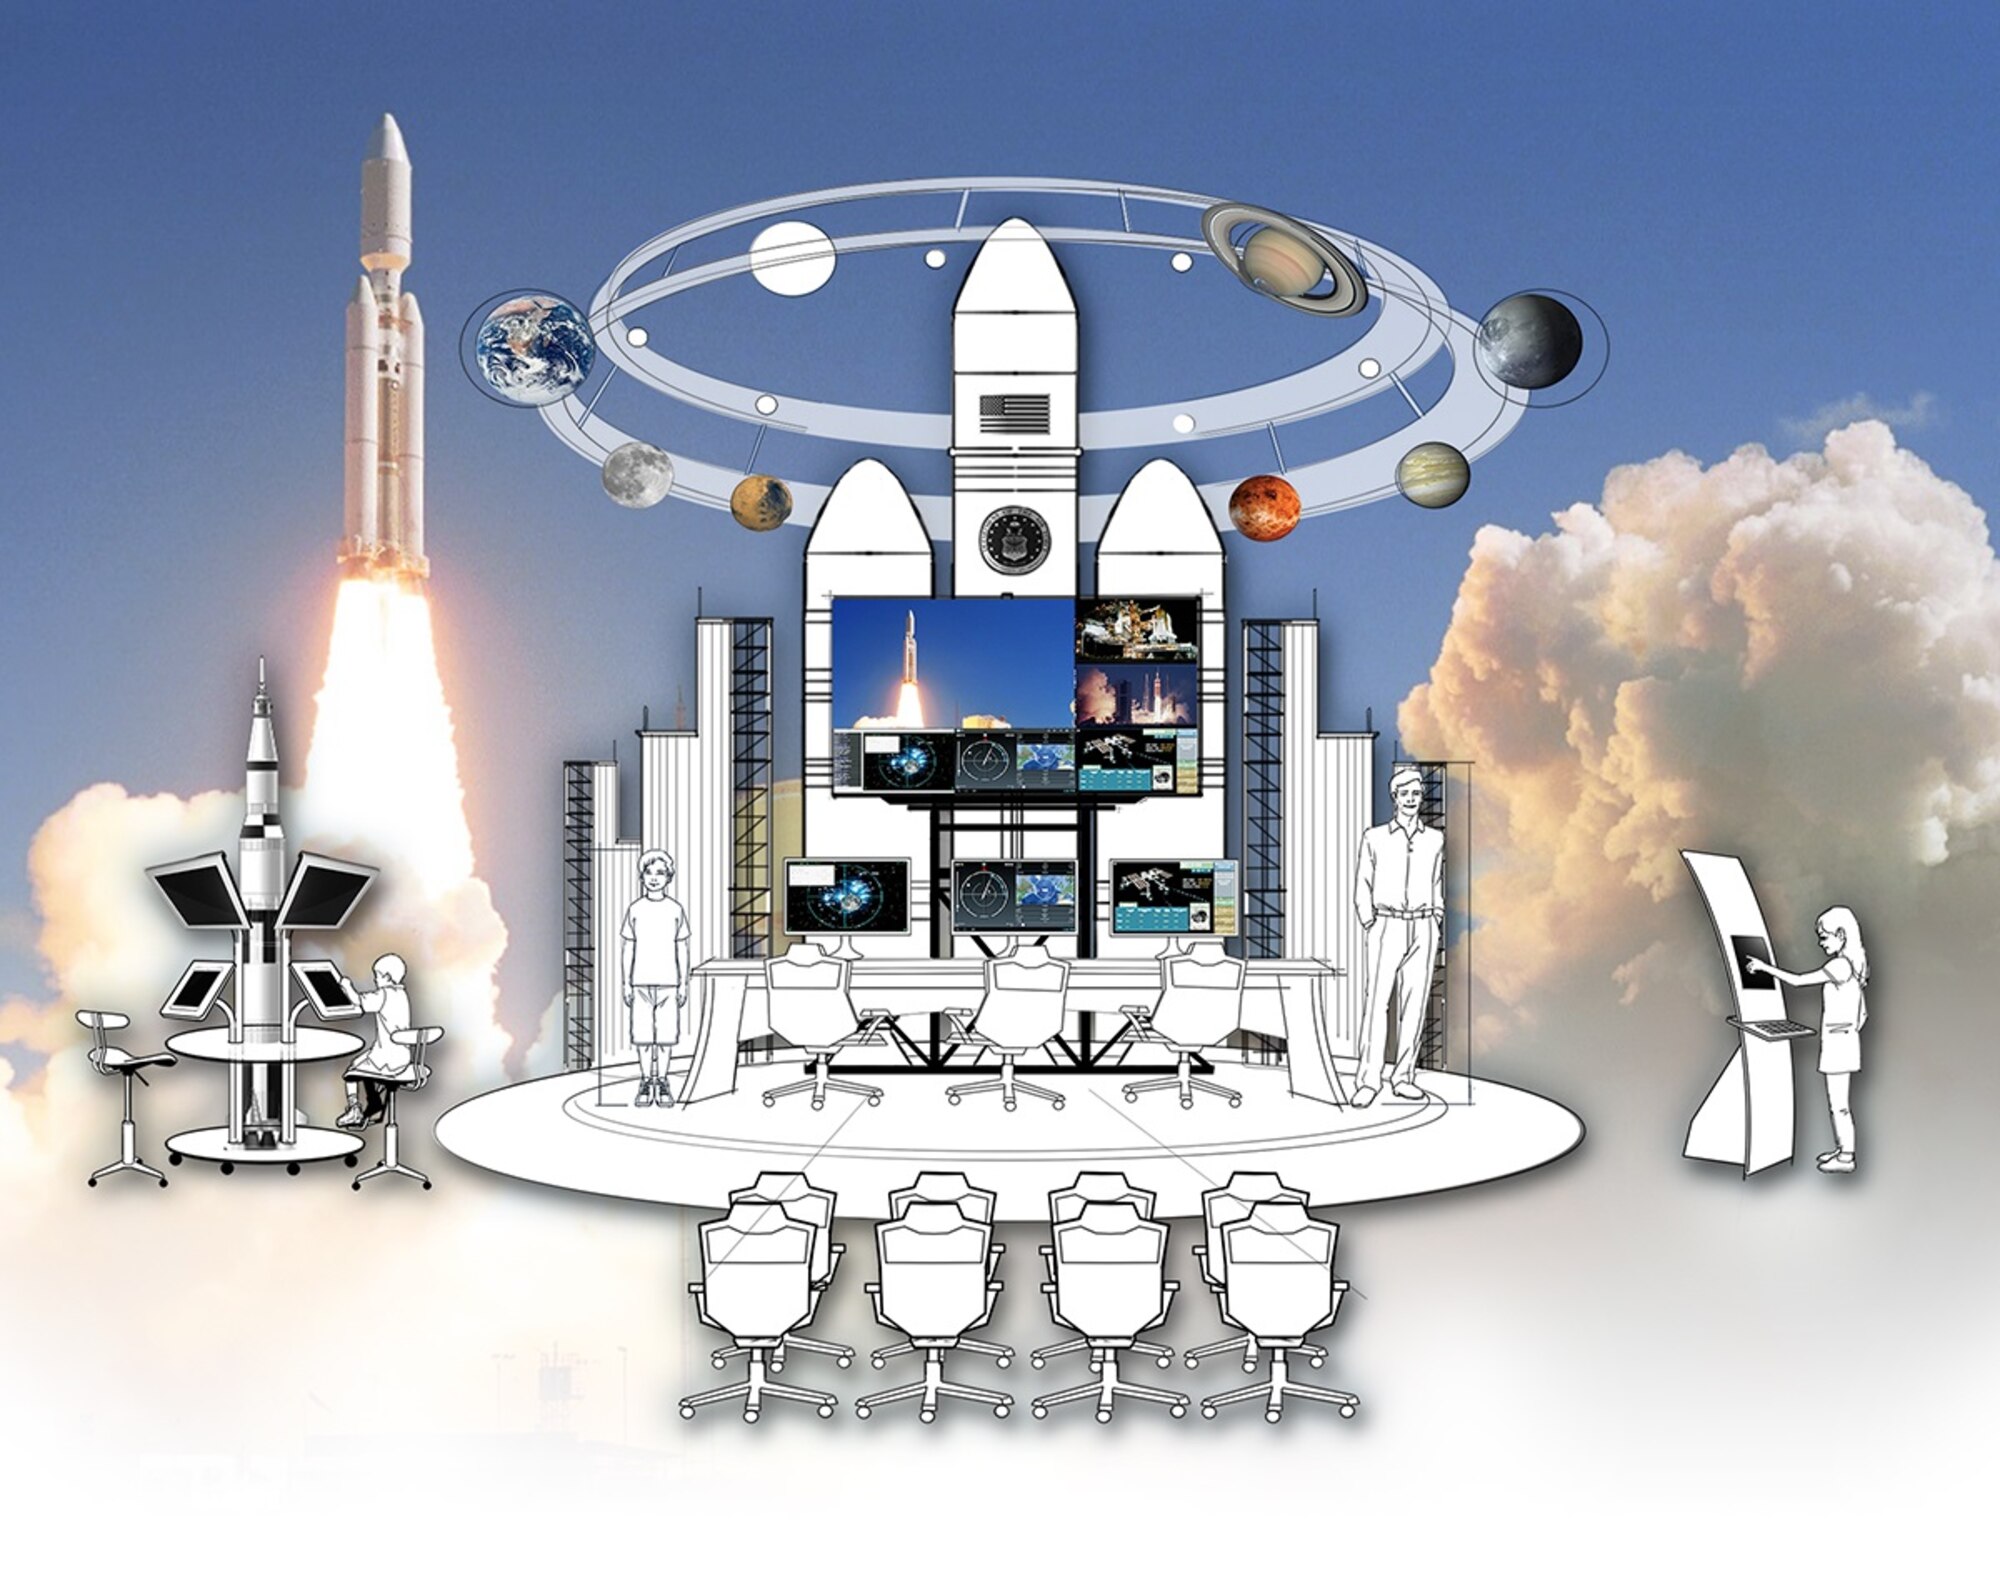 A rendering of the future Vandenberg Launch Exhibit that will be installed at the Santa Maria Valley Discovery Museum in 2017. The exhibit is part of an Educational Partnership Agreement between the museum and the 30th Space Wing at Vandenberg Air Force Base, California. (Courtesy photo / 30th Space Wing)